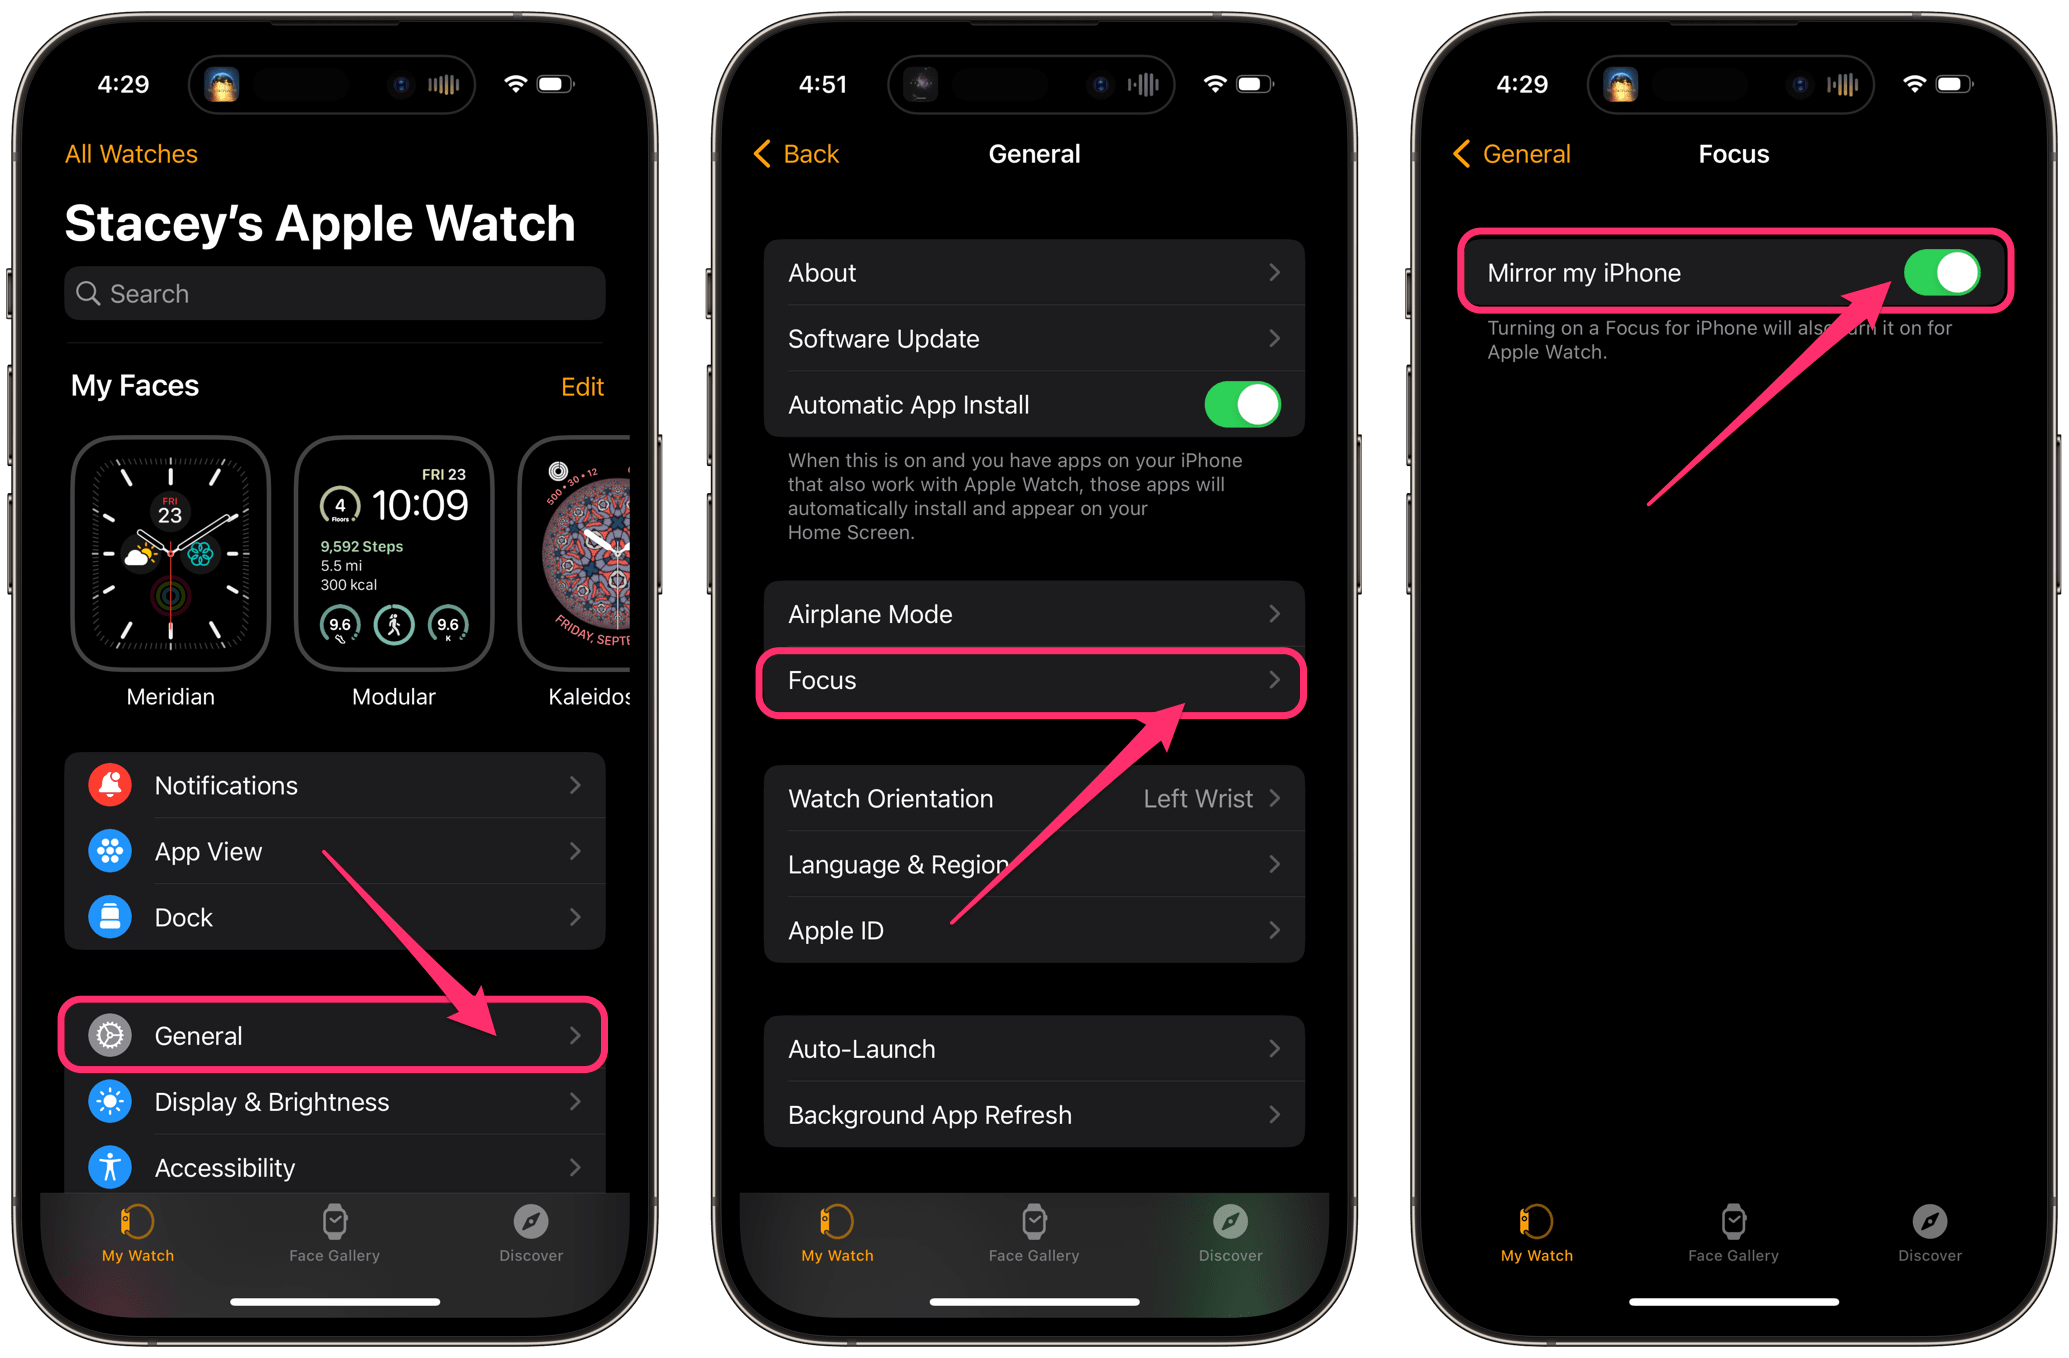 mirror iPhone focus for Apple Watch